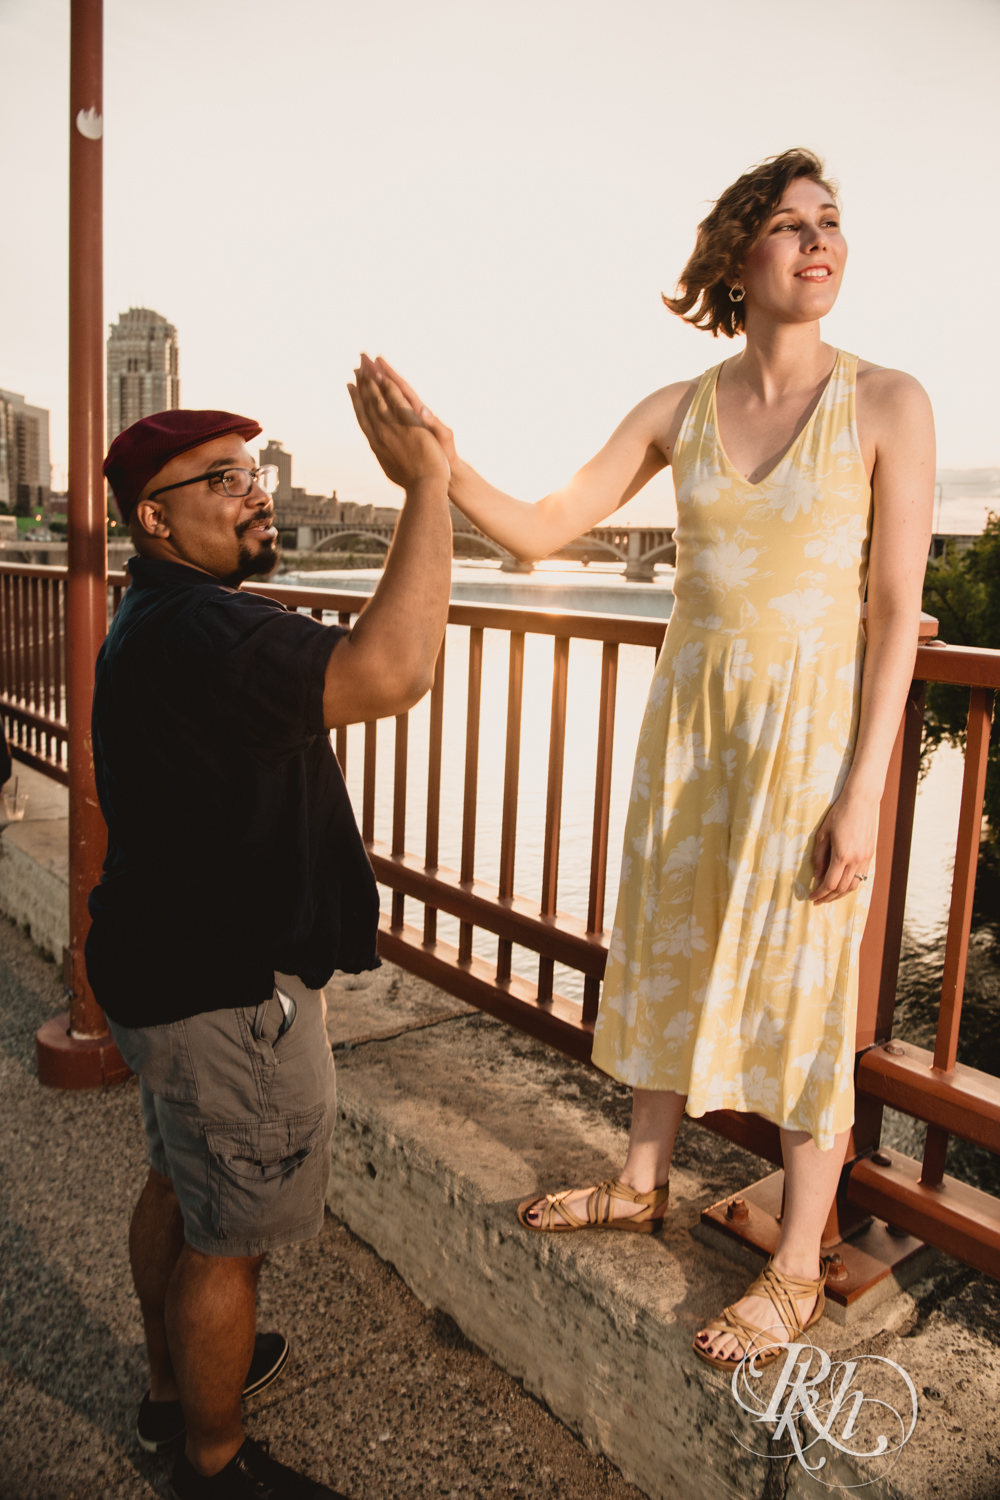 Black man and woman high five at sunset on Stone Arch Bridge in Minneapolis, Minnesota.